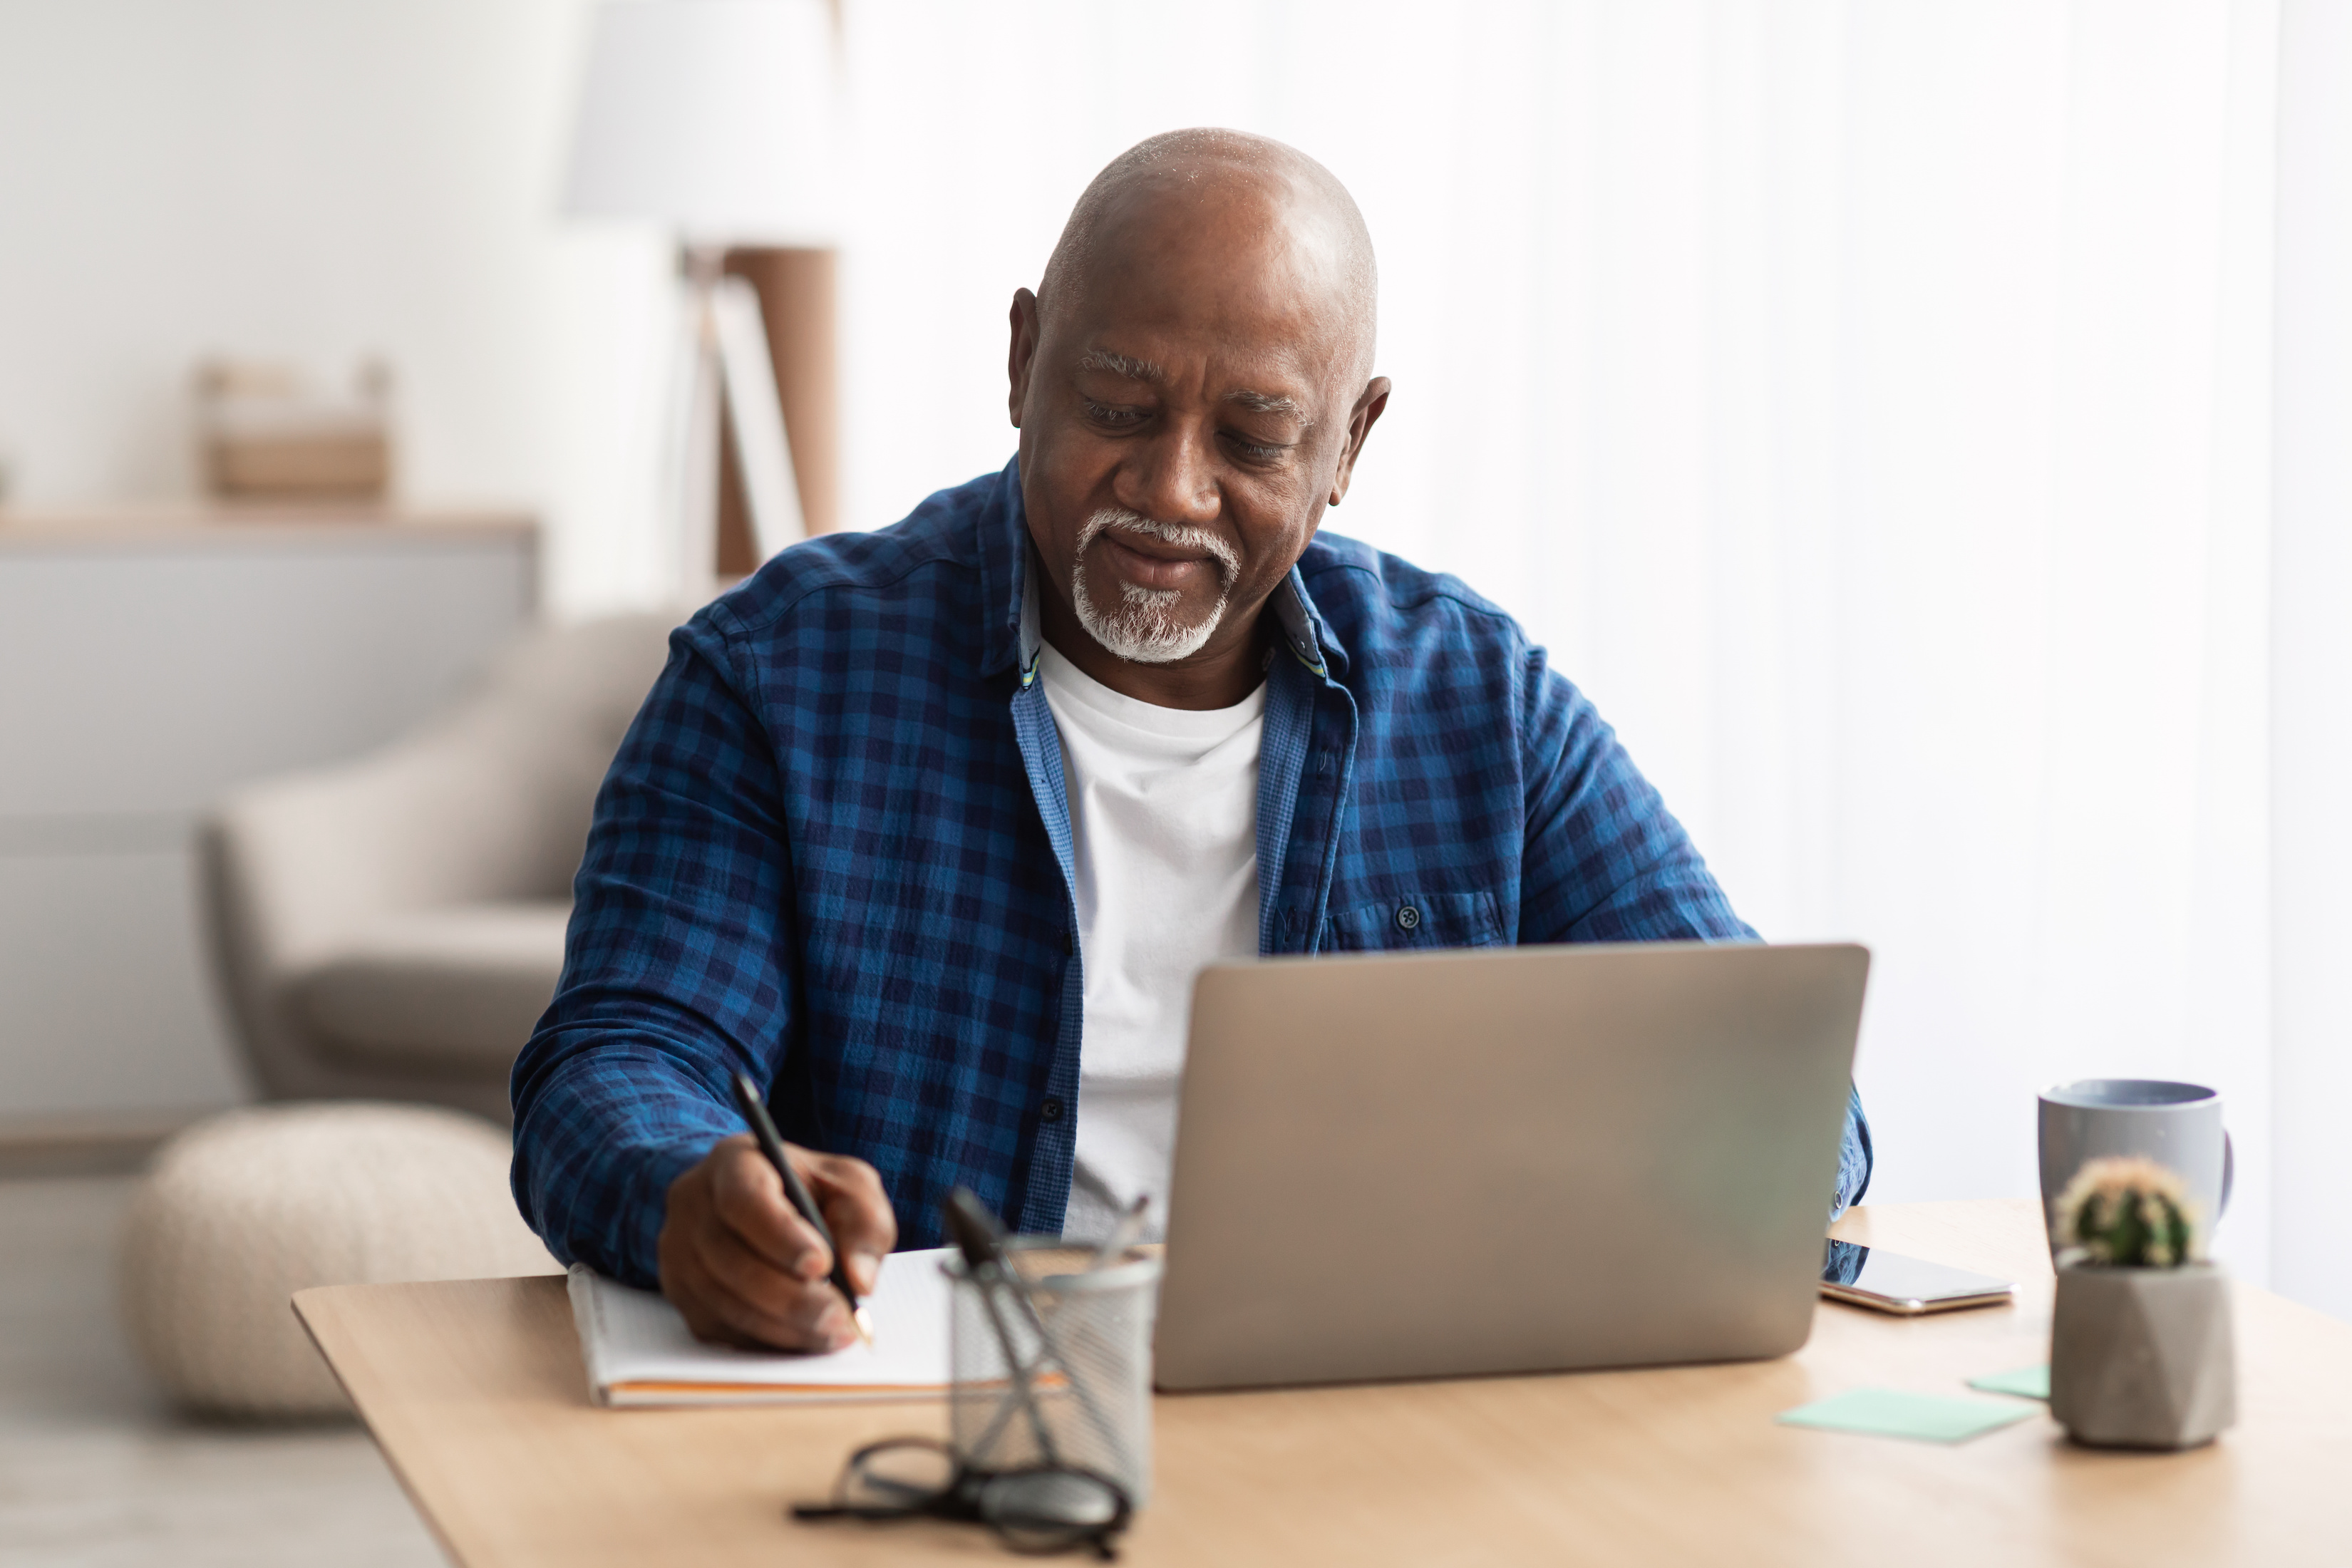 A man jots down a note while reading online about wills. Creating a will is a crucial step in estate planning.